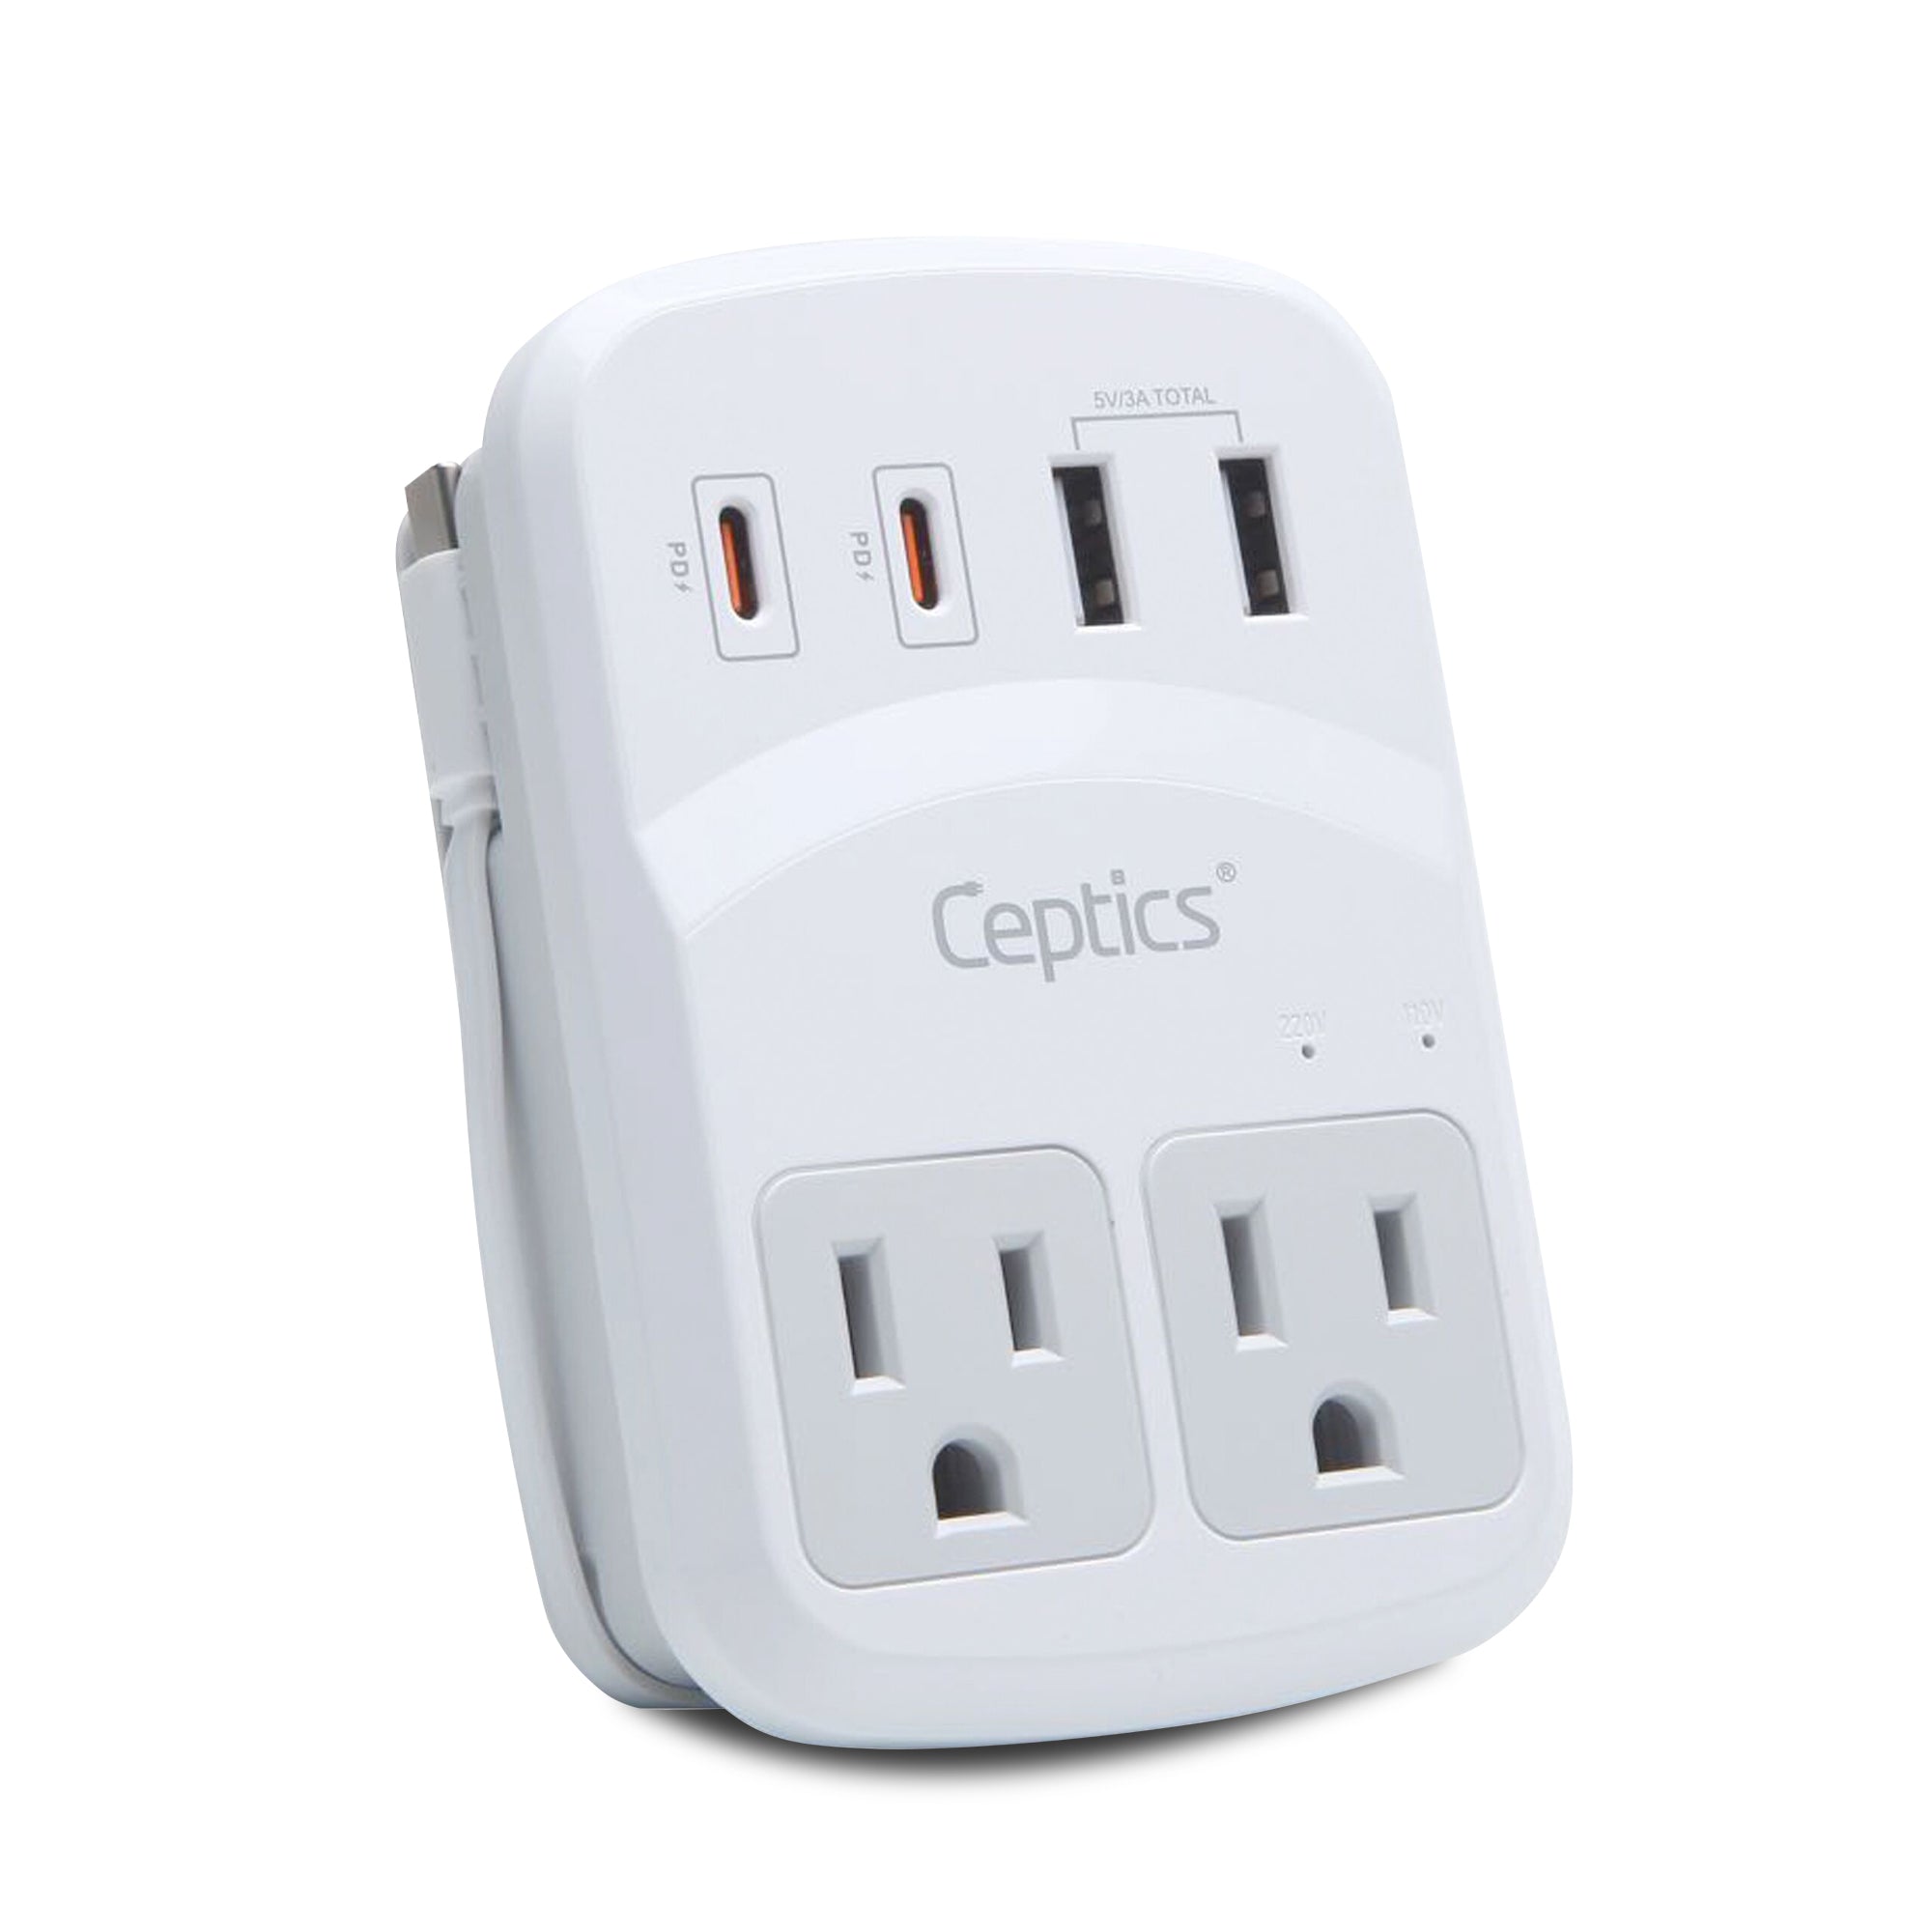 Ceptics World Travel Adapter Kit 2 USB-A USB-C US Outlets 20w/qc 18W Power Delivery Surge Protection SWadAPt Compatible for Europe UK China Australia